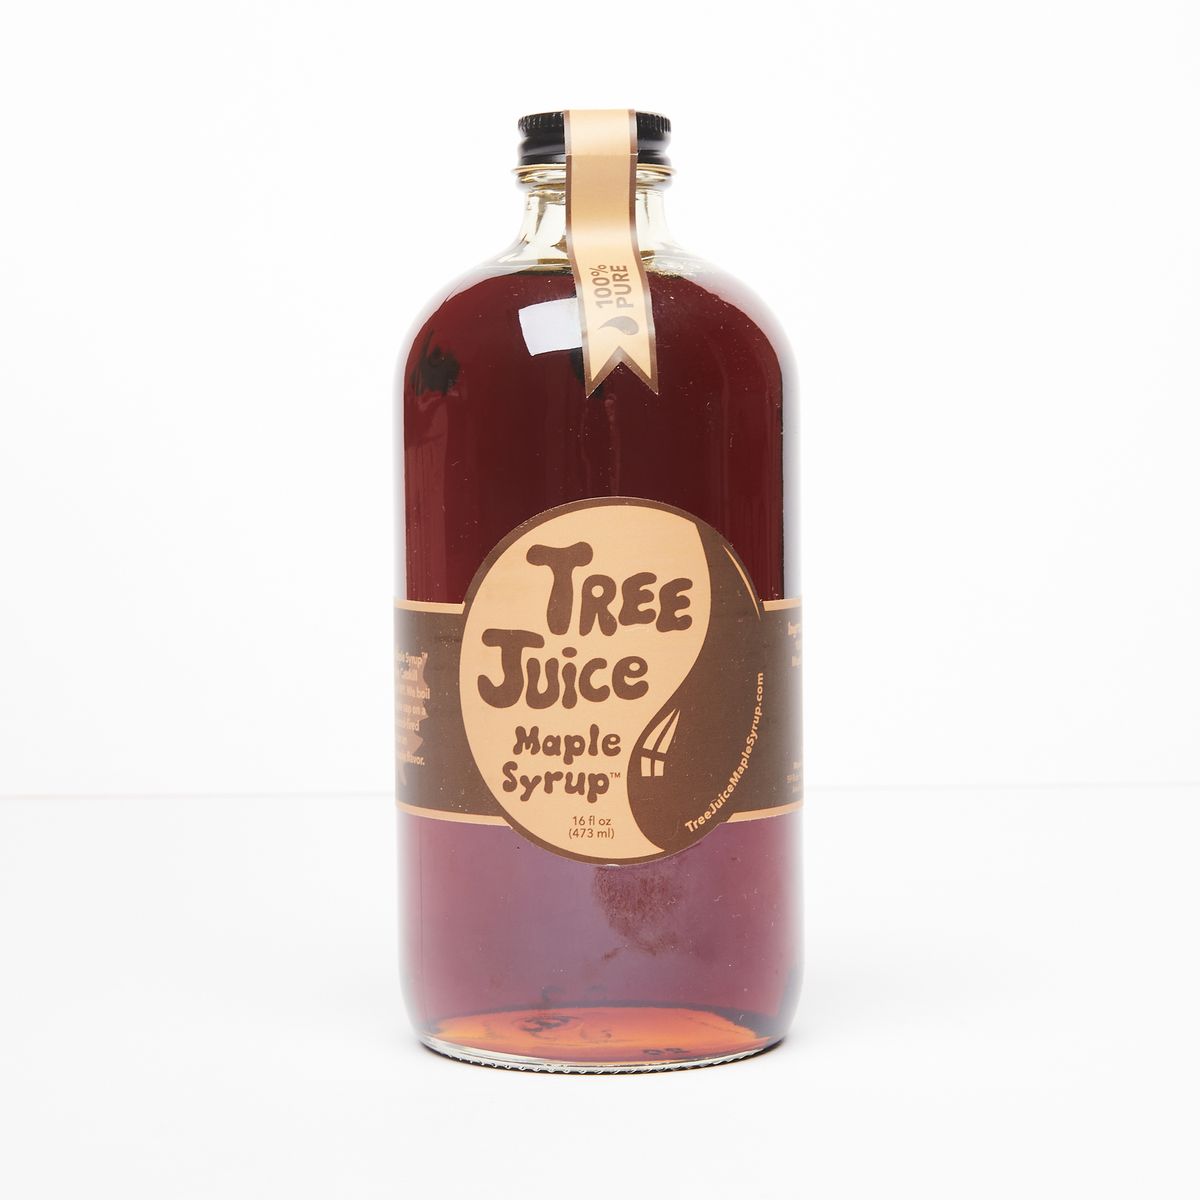 Glass bottle with black cap filled with brown syrup and a label that reads "Tree Juice Maple Syrup"